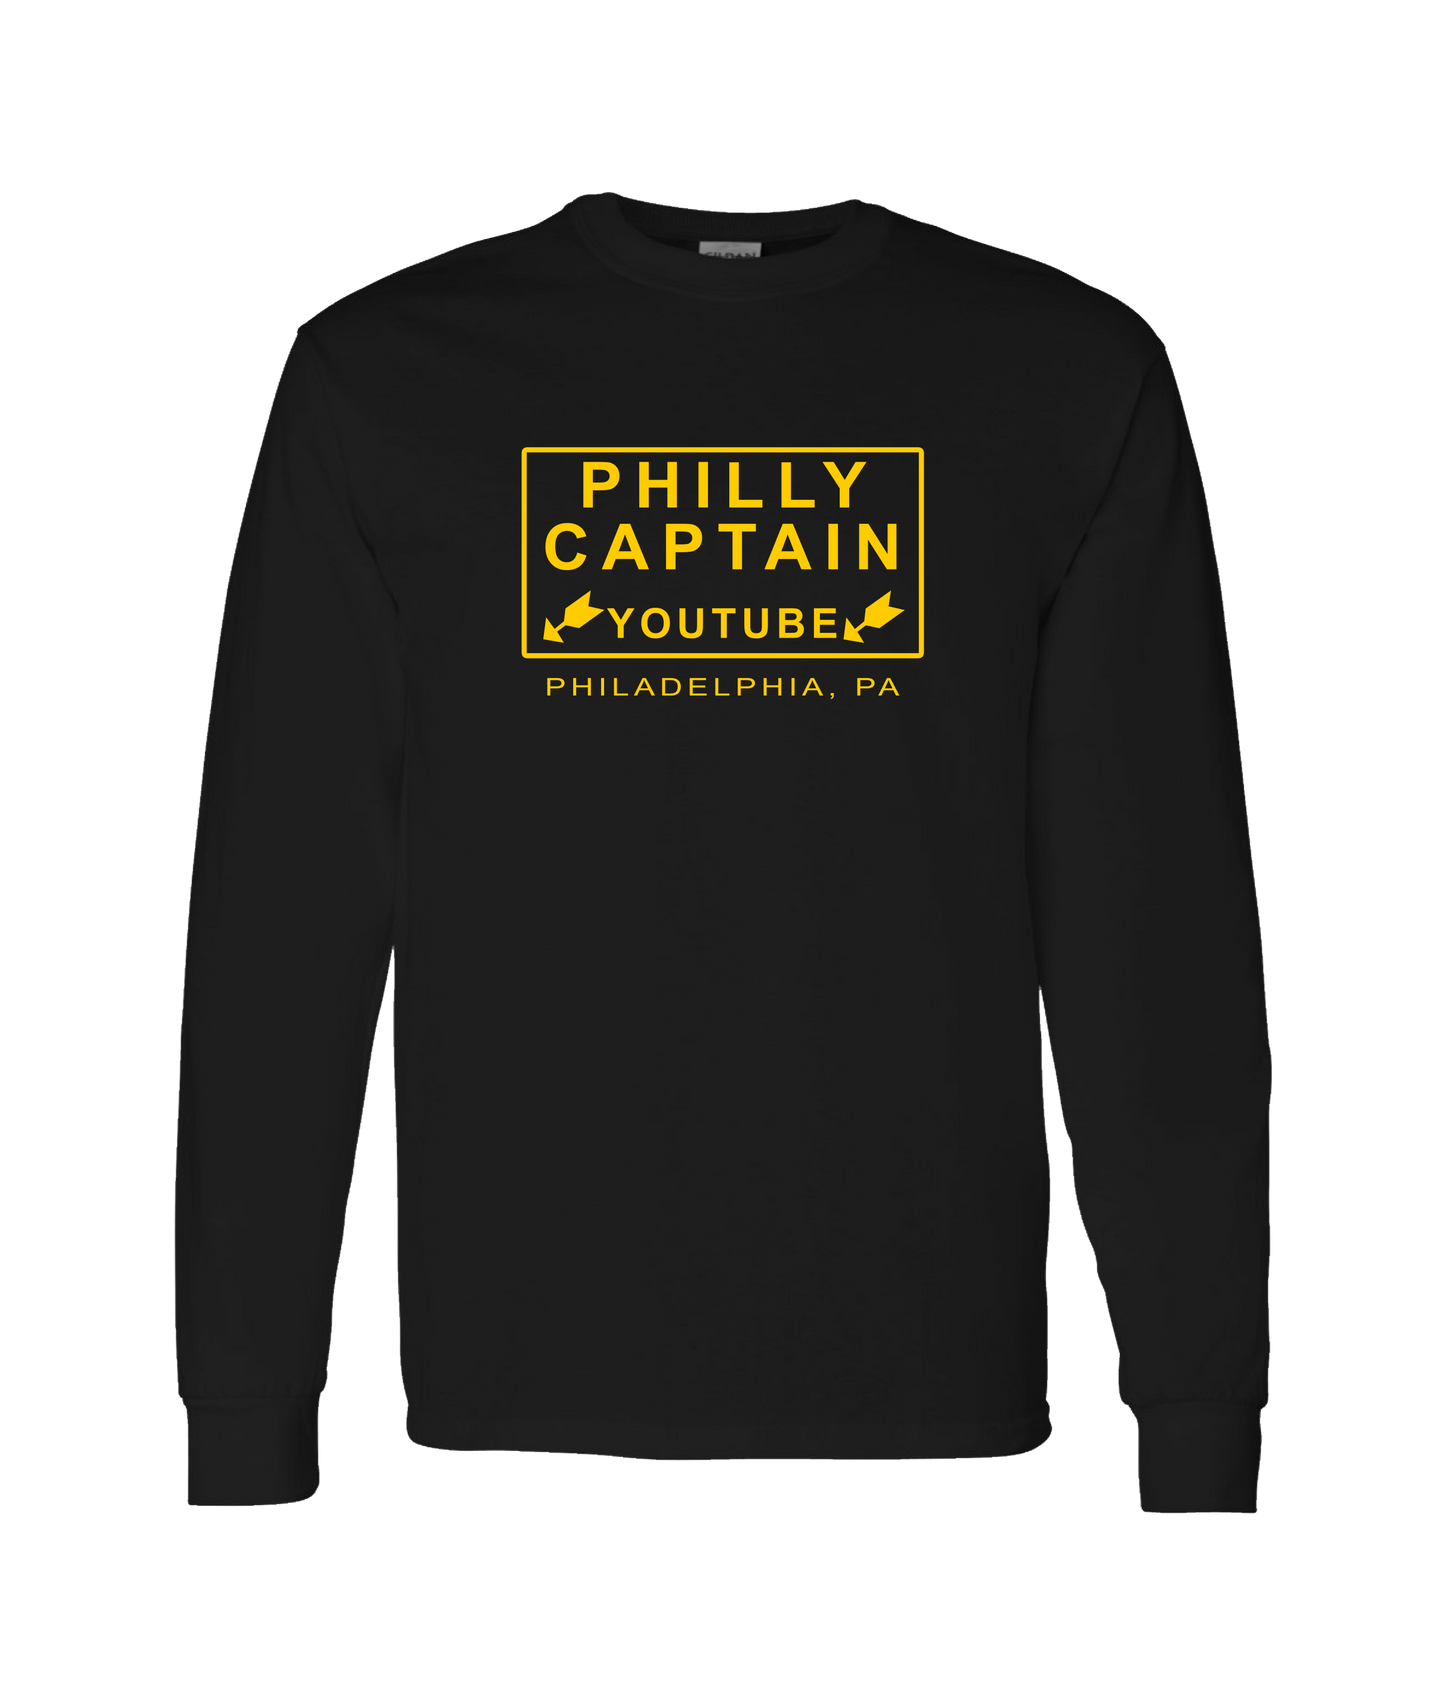 The Philly Captain's Merch is Fire - YouTube - Black Long Sleeve T